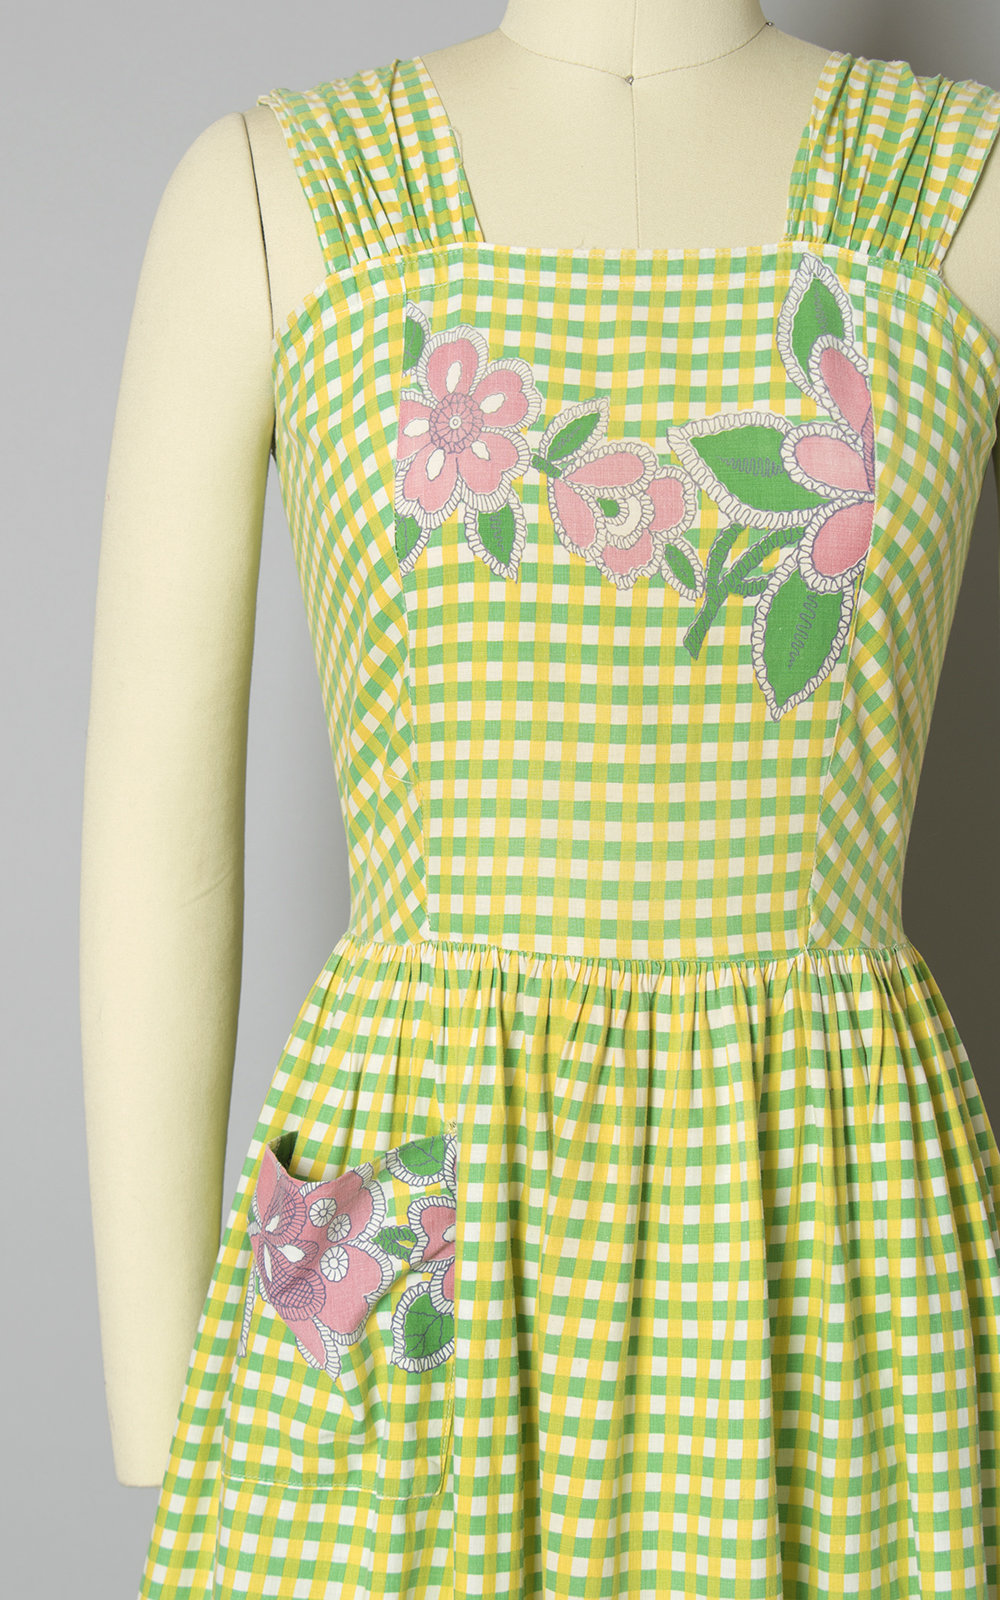 Vintage 1940s Dress | 40s Floral Border Print Gingham Cotton Sundress Green Yellow Full Skirt Day Dress with Pocket (x-small)